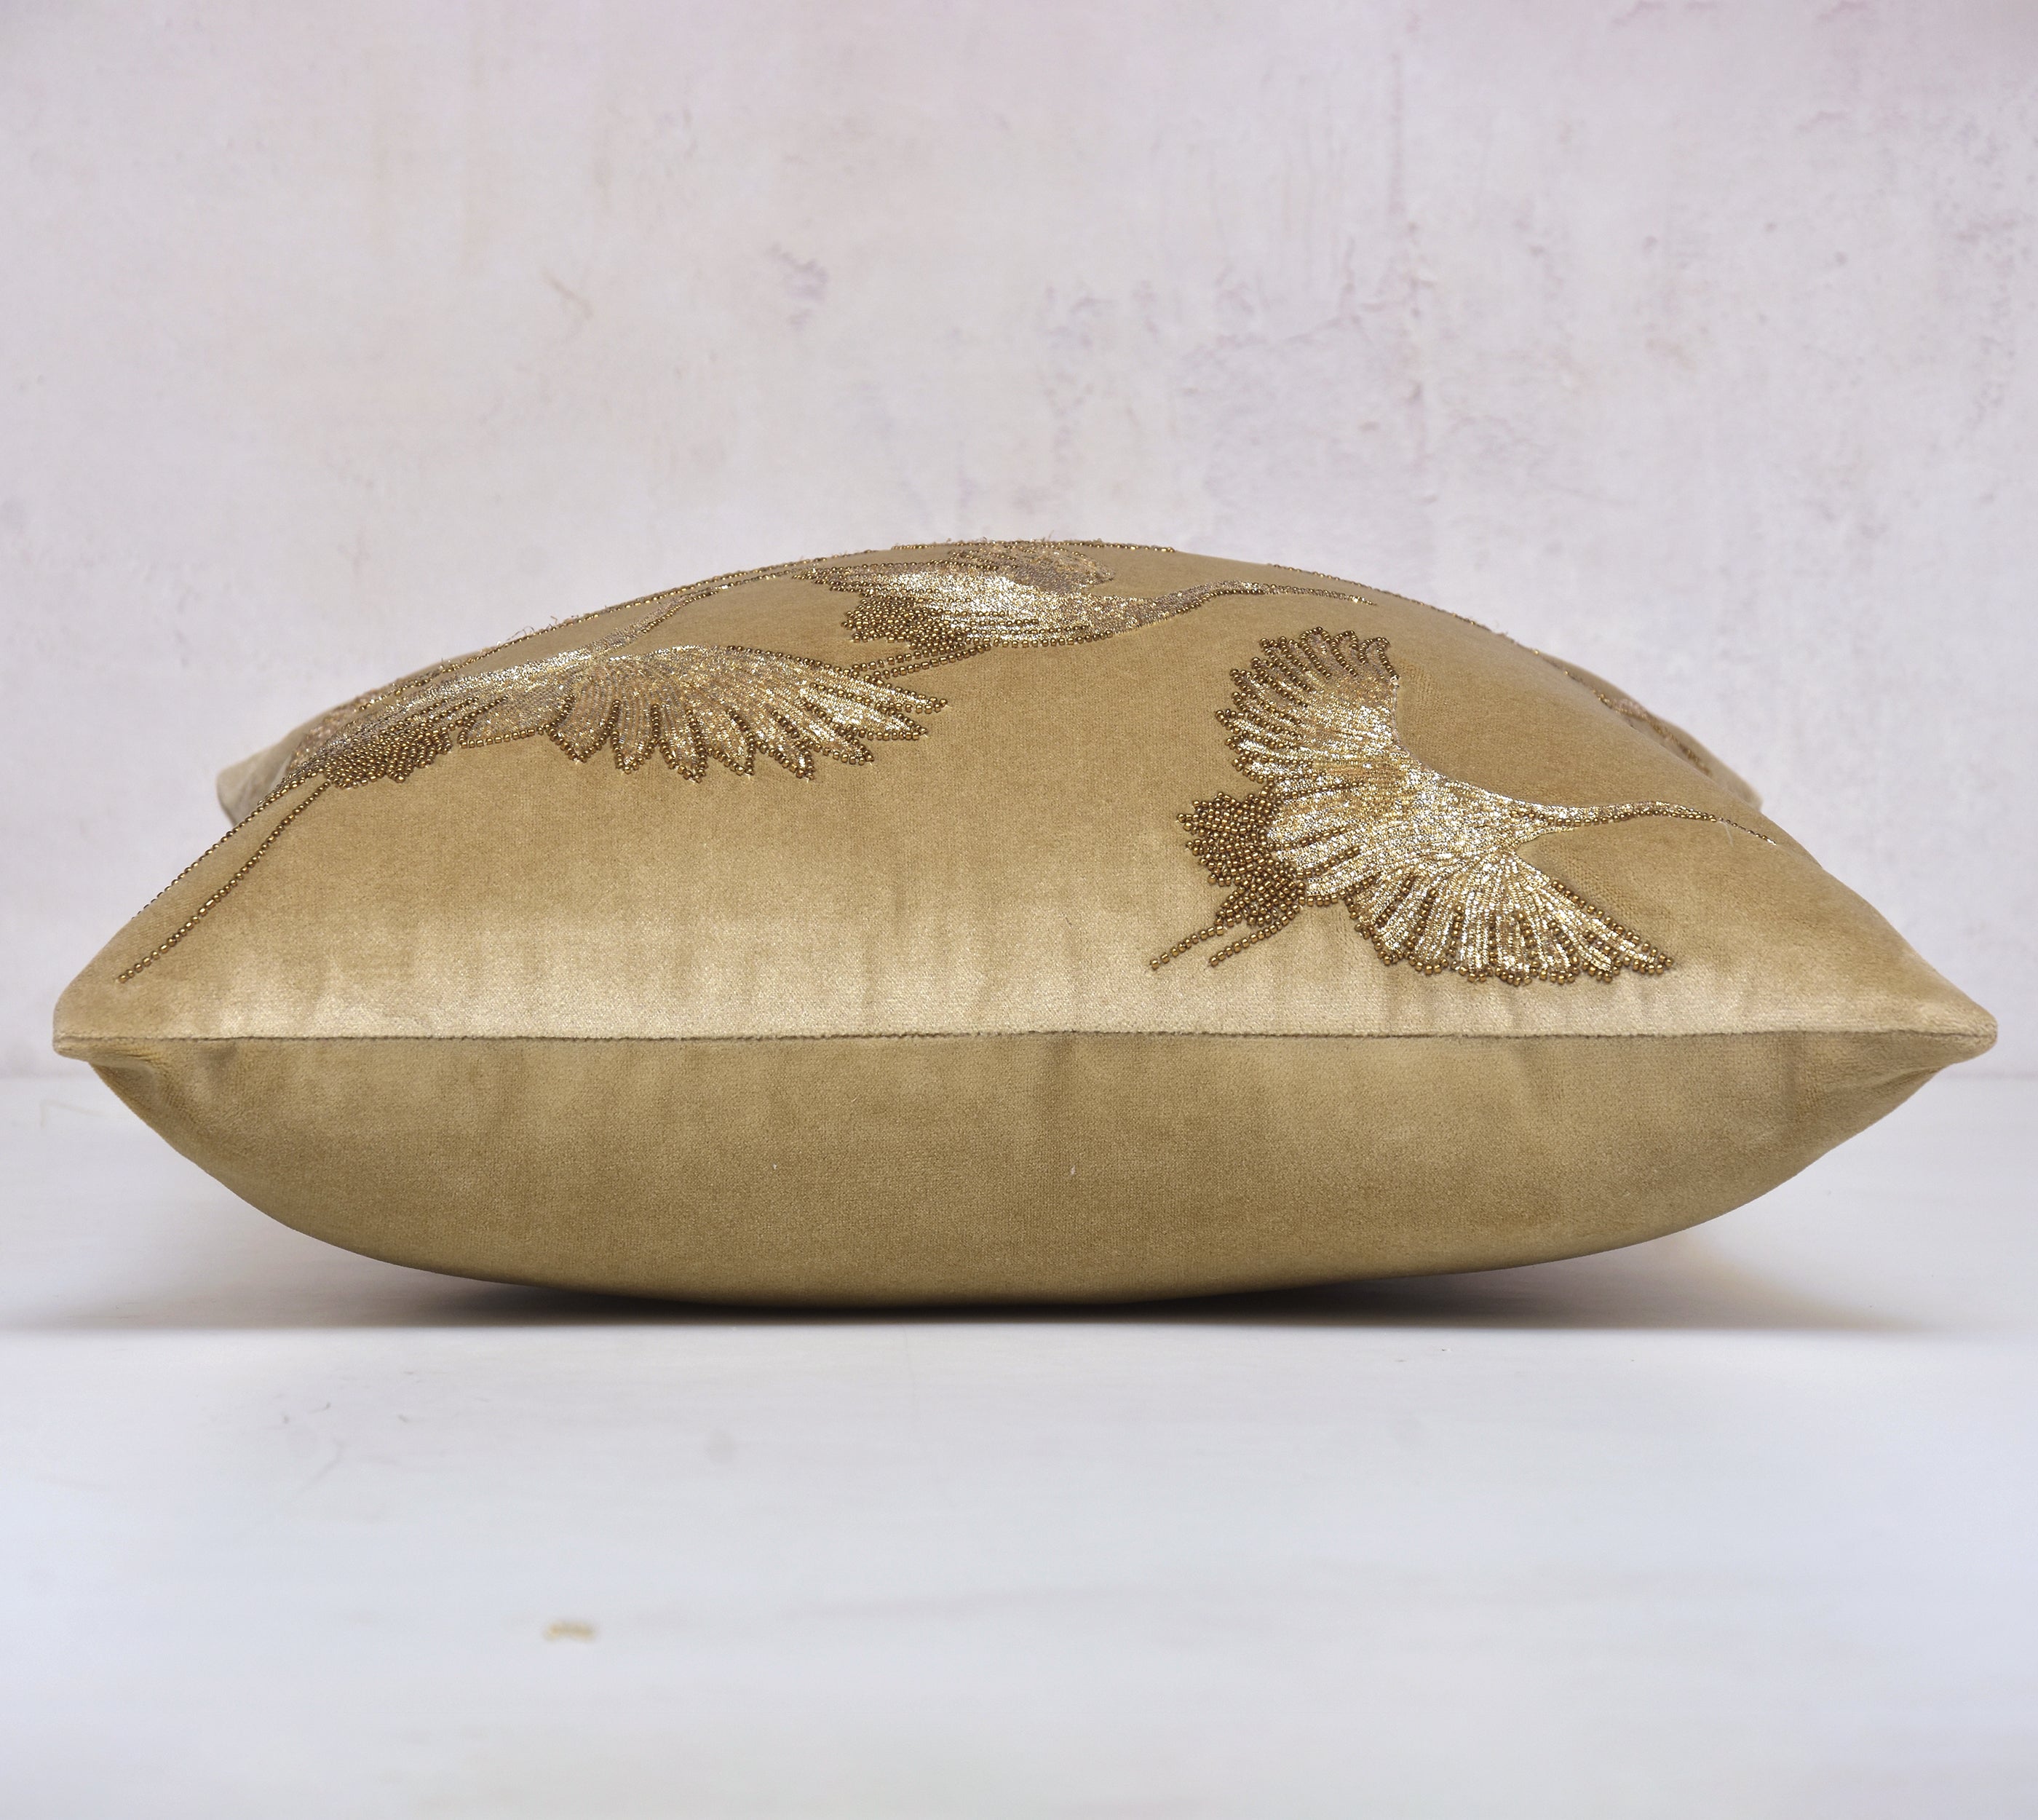 AURORA Gold and Antique Gold Cushion Cover